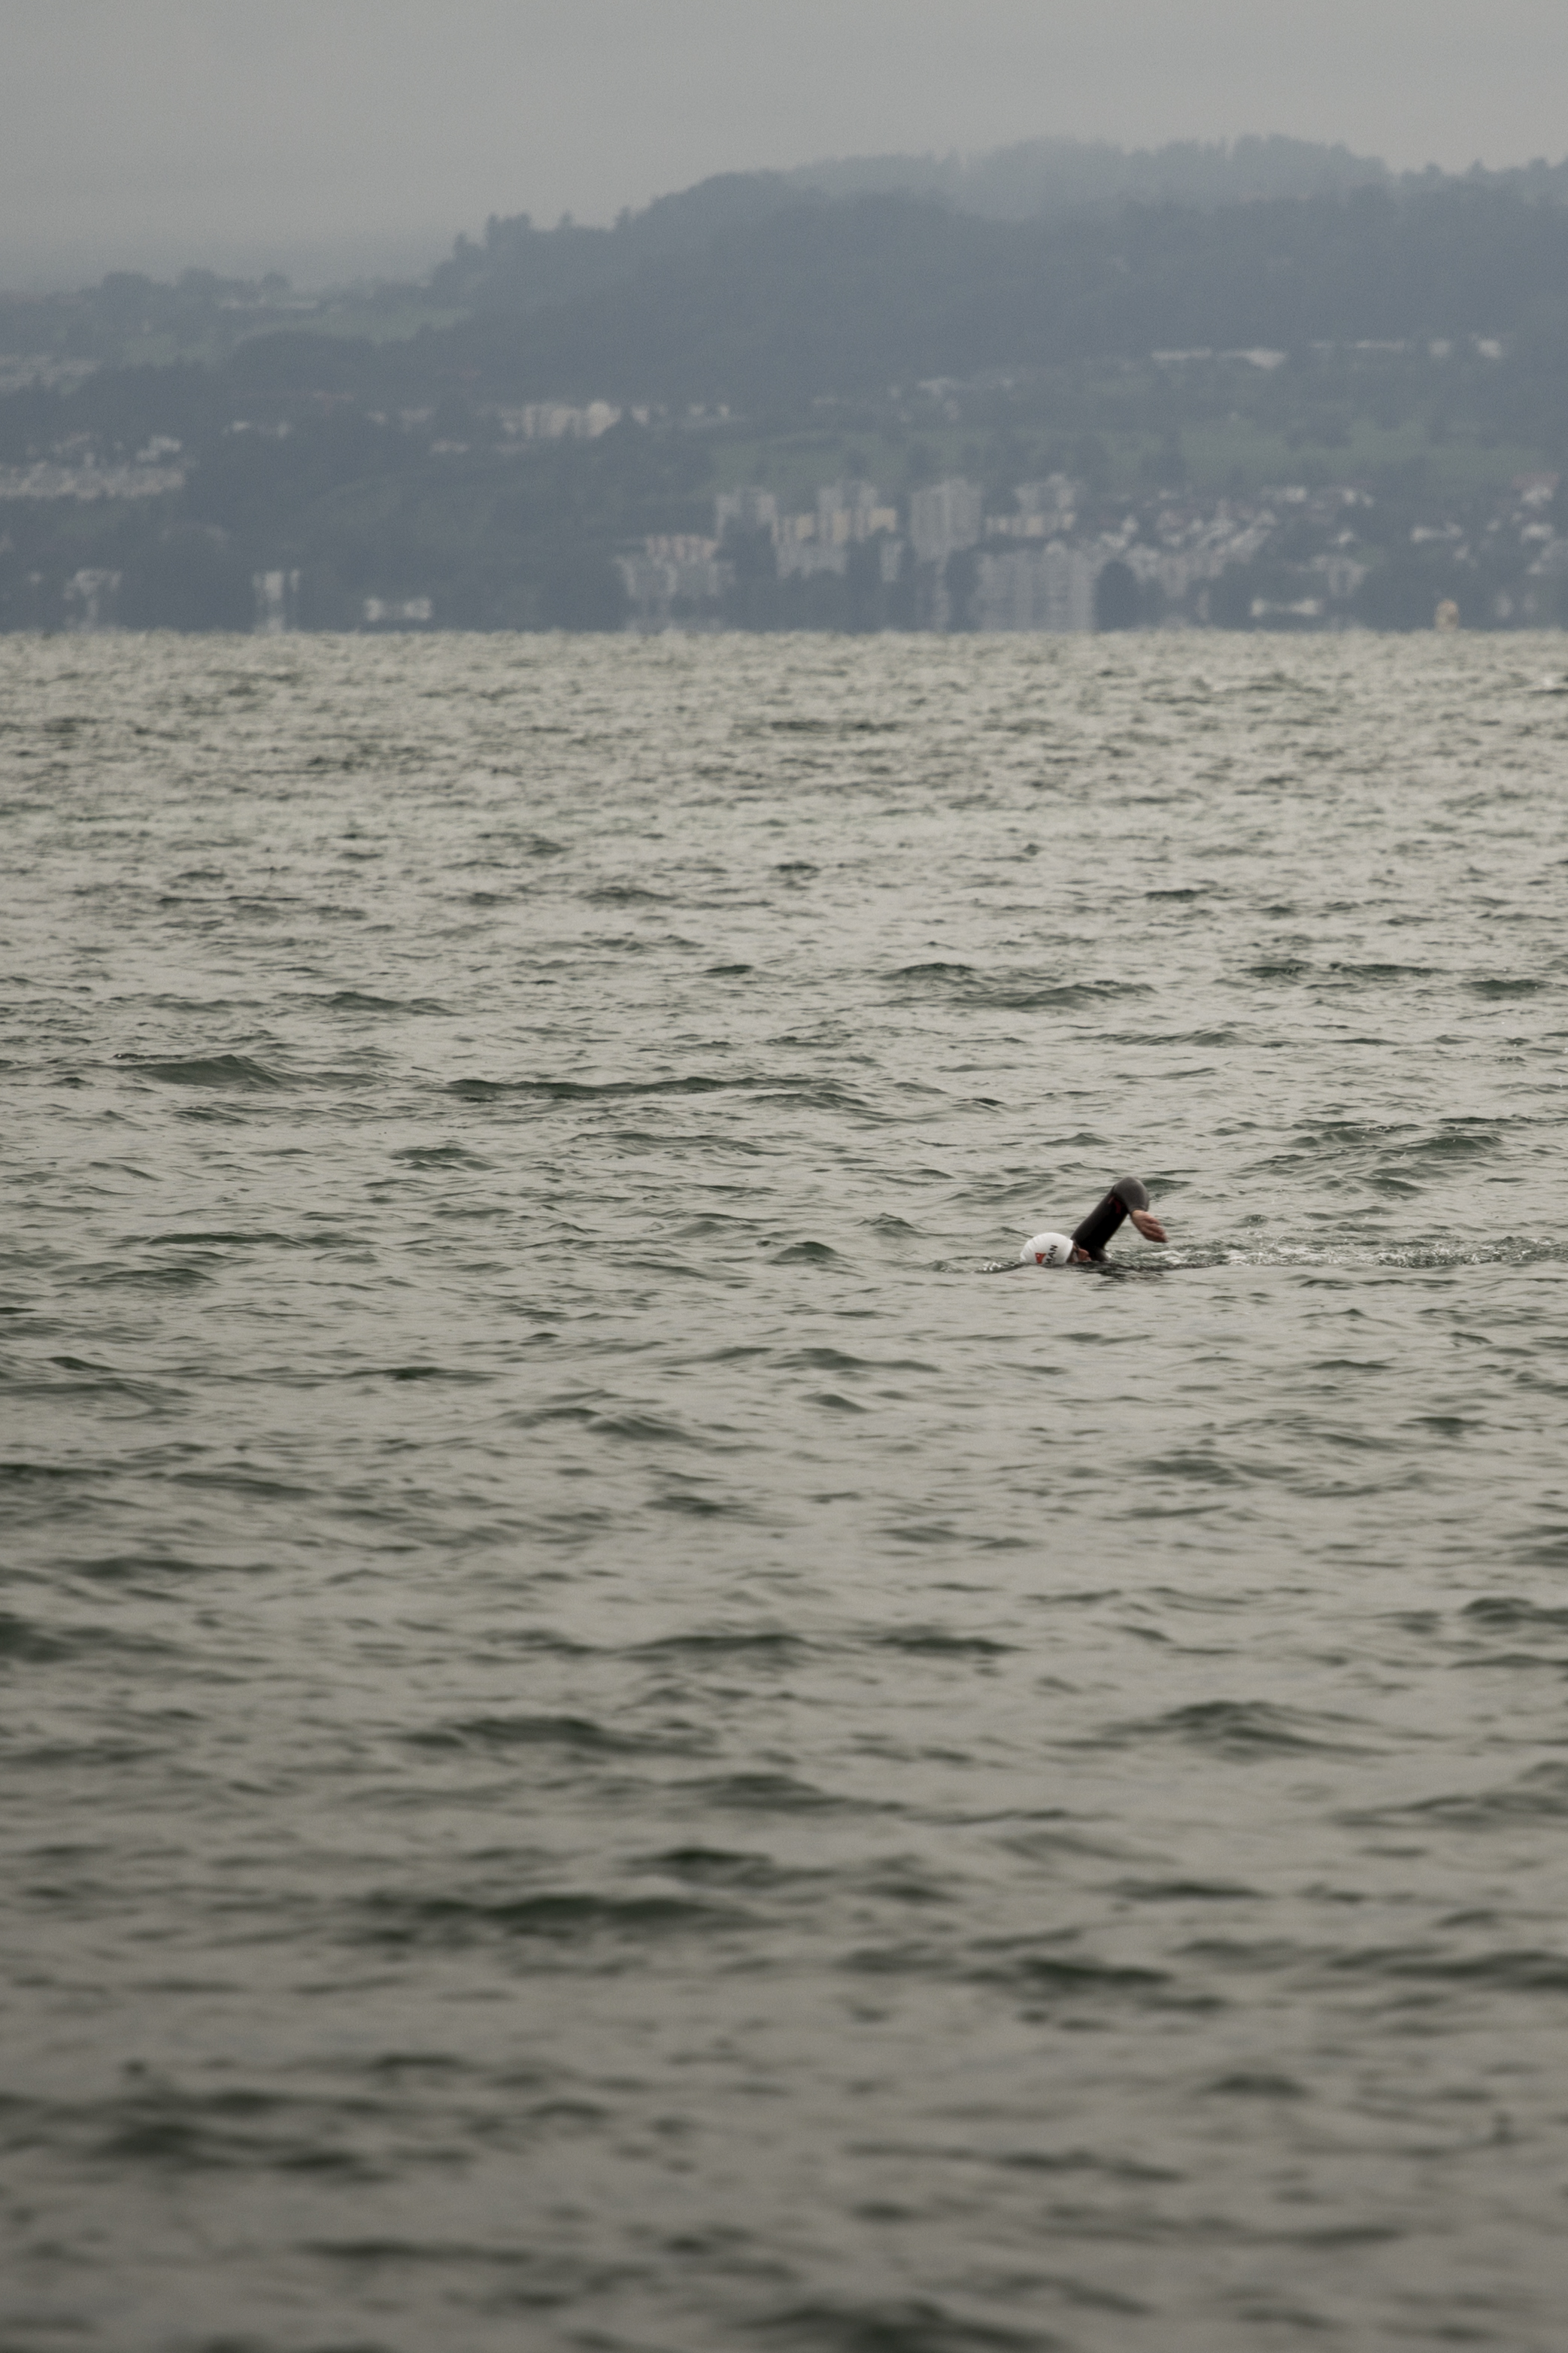 Ironman Zurich, 2014. Athletes from around the world are training in cold open waters before the race. Photo: Trivik Verma